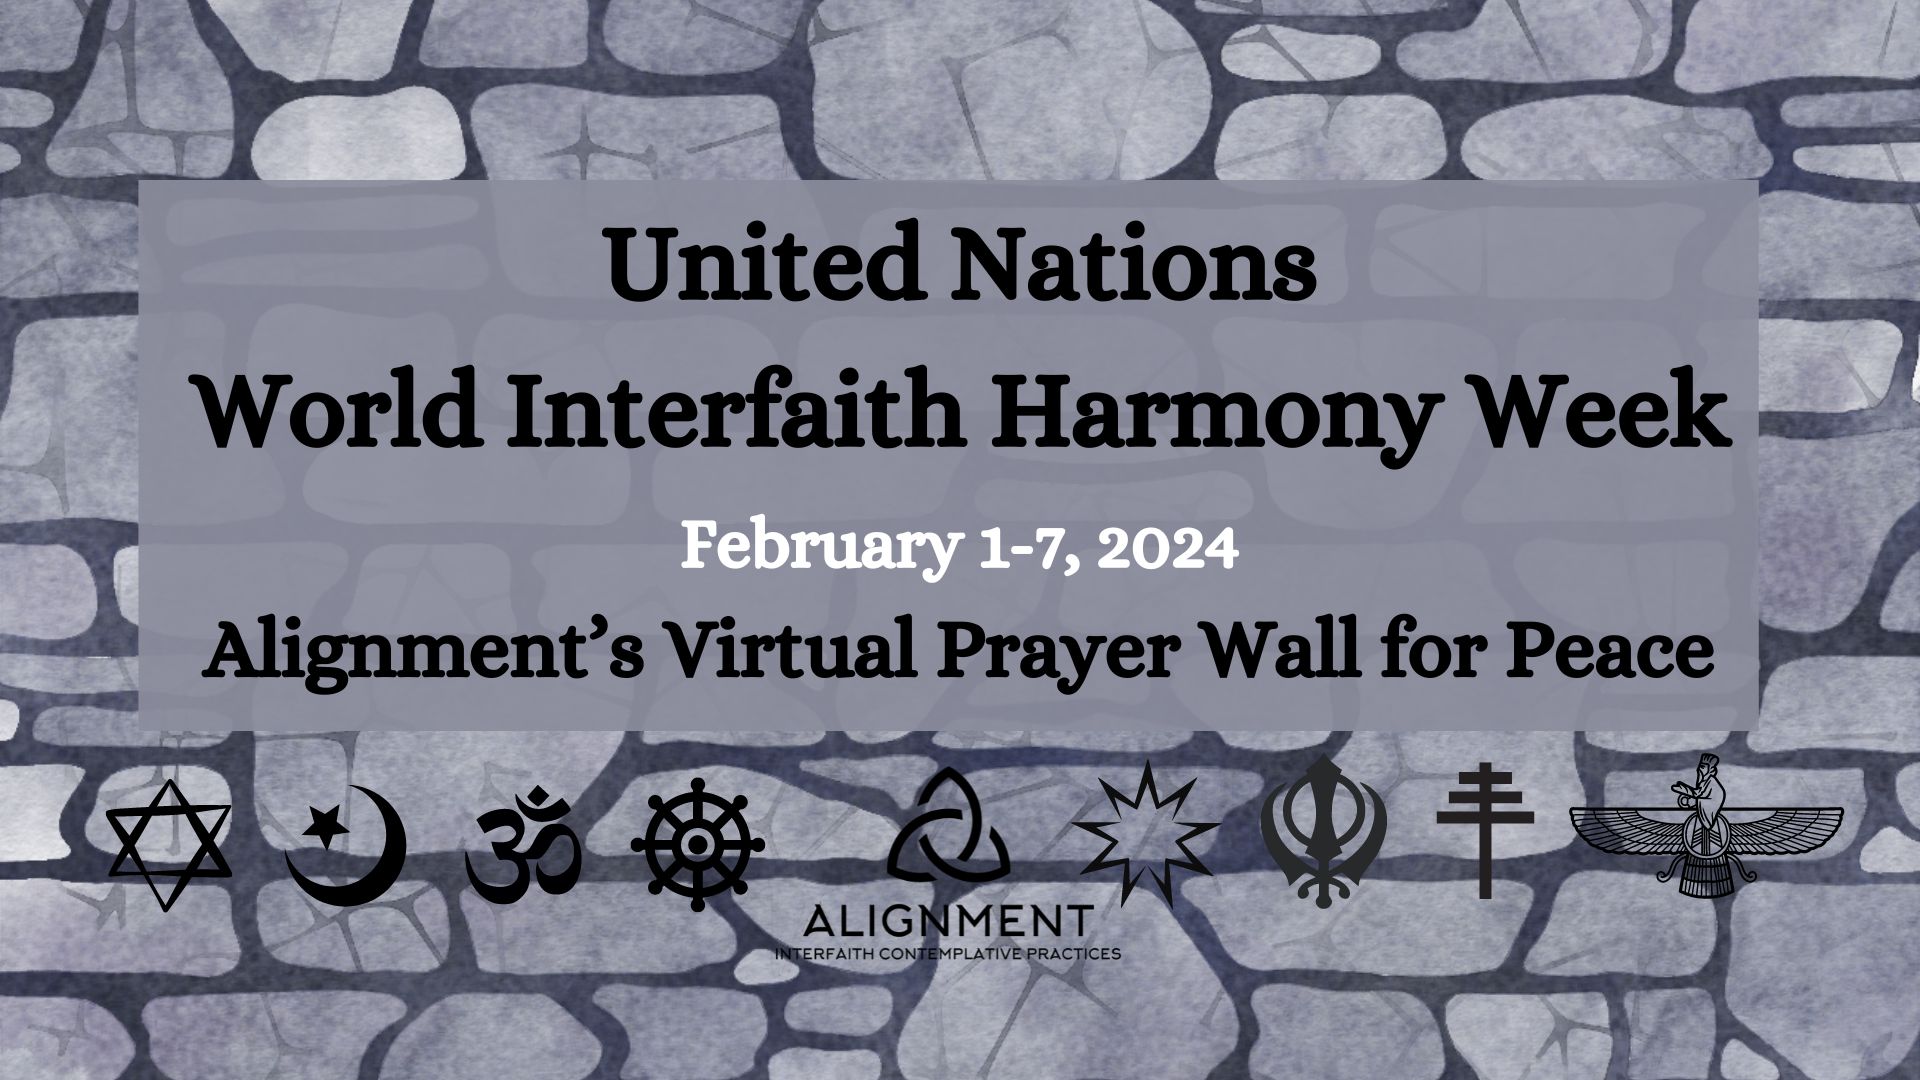 An invitation to visit Alignment's digital prayer wall for peace